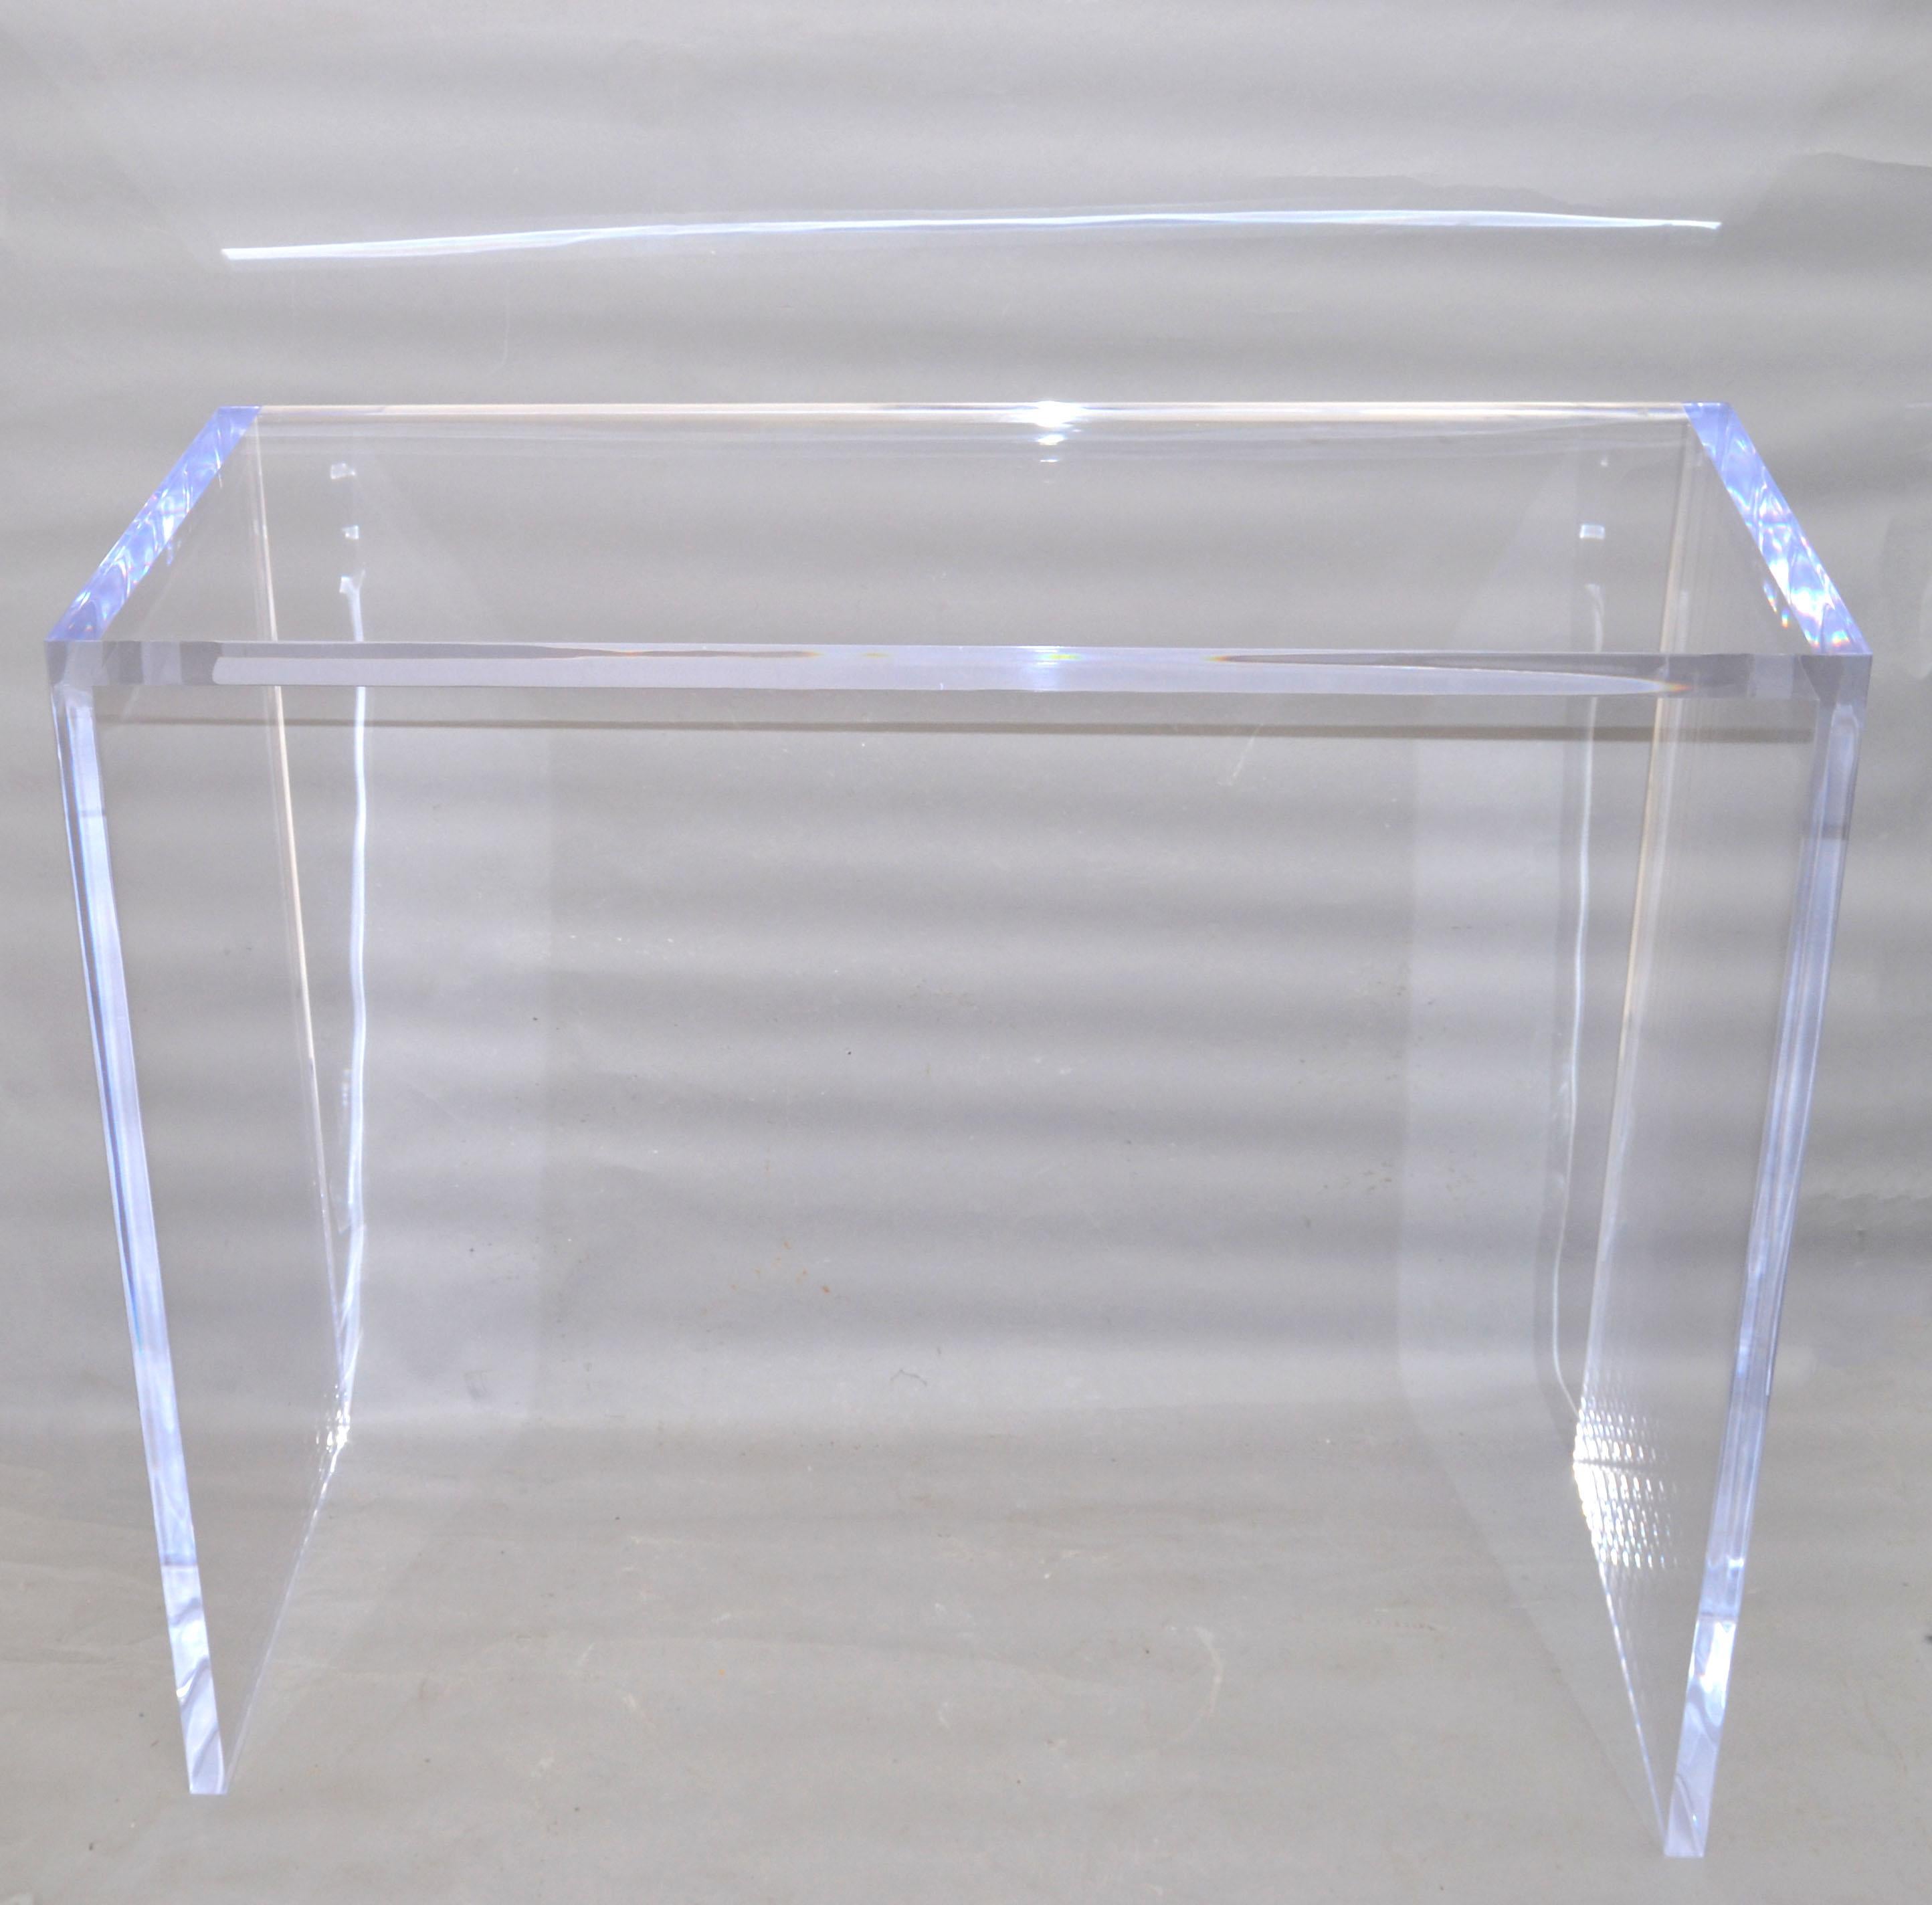 Modern Contemporary handmade clear Lucite console, hallway table, vanity.
Thick 1.25 inches Lucite panels make this Console sturdy and durable.
Slender Minimalist Design for any interior.